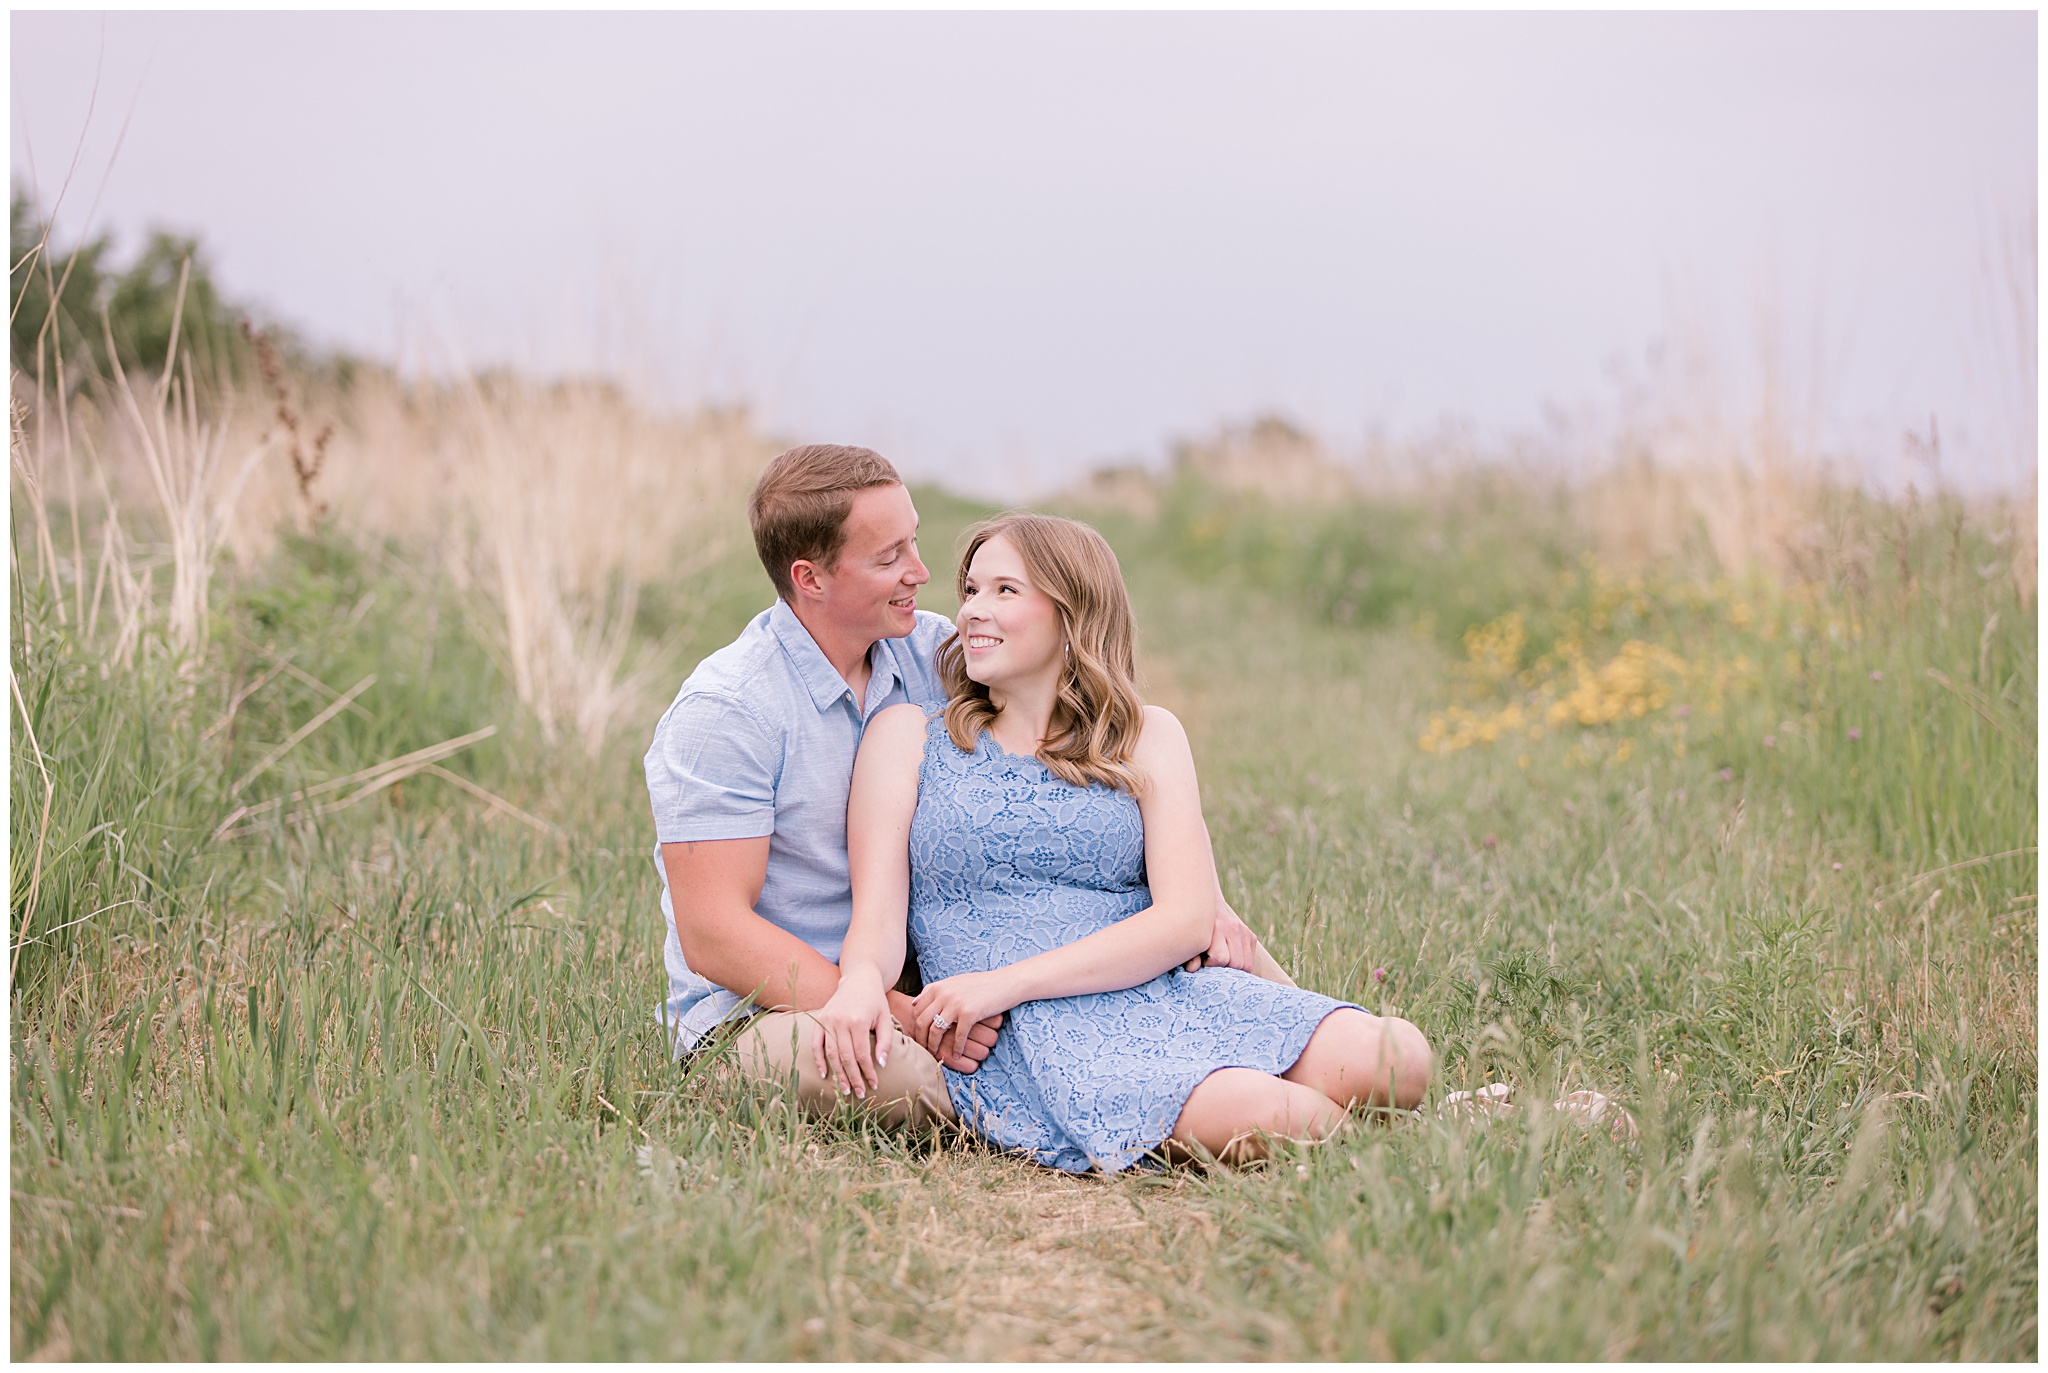 Nature-Inspired Engagement Session La Crosse WI by Volkman Photography